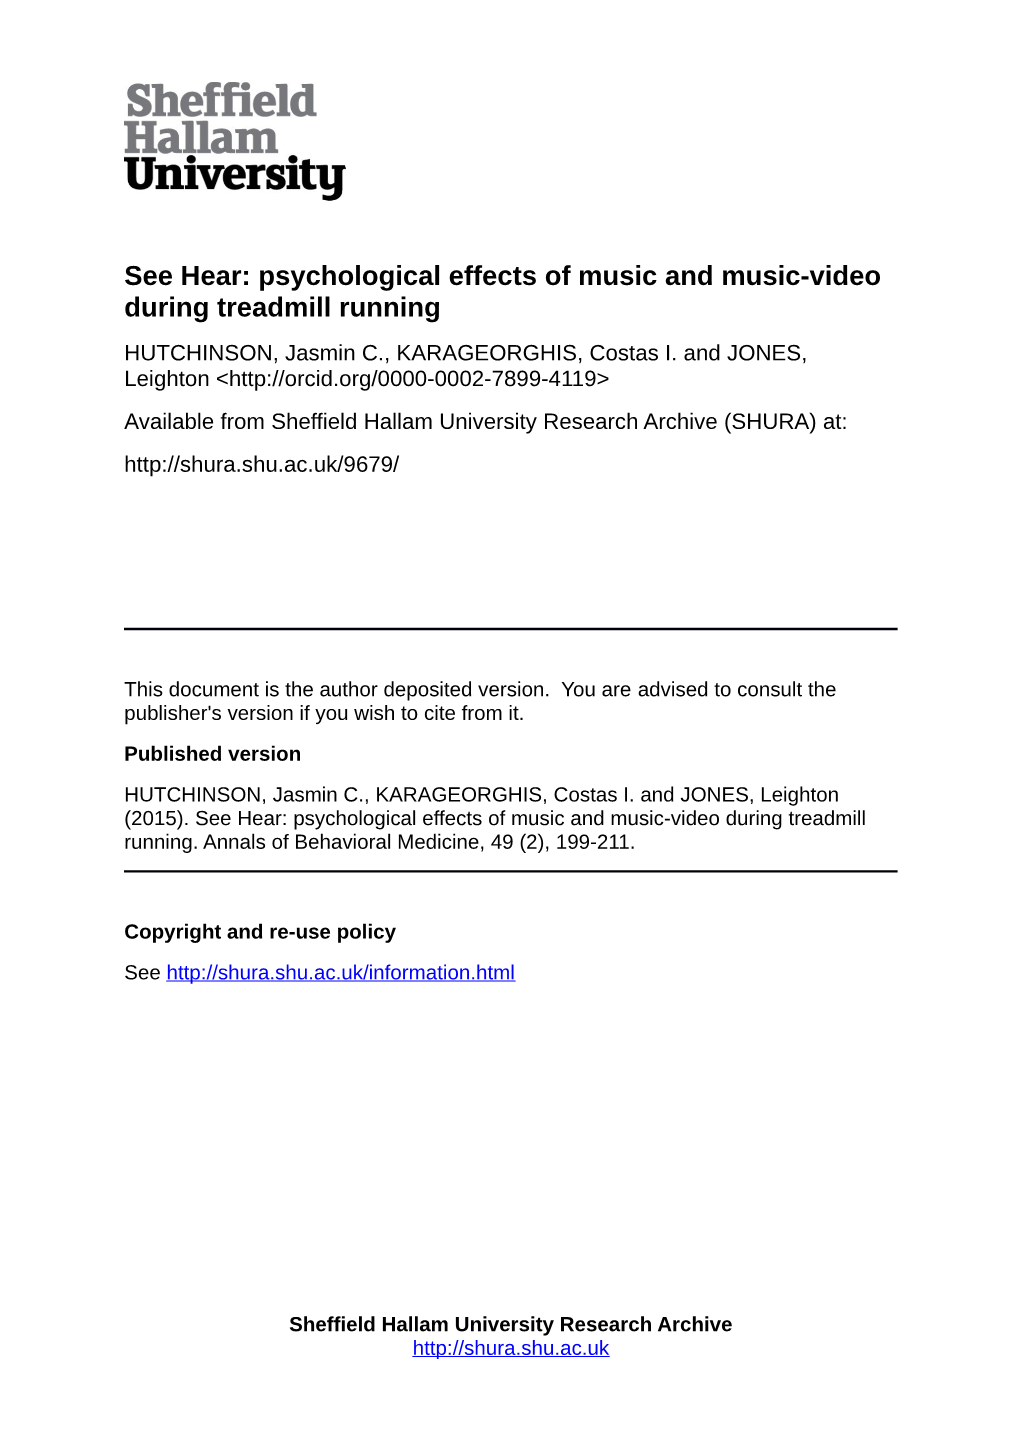 Psychological Effects of Music and Music-Video During Treadmill Running HUTCHINSON, Jasmin C., KARAGEORGHIS, Costas I